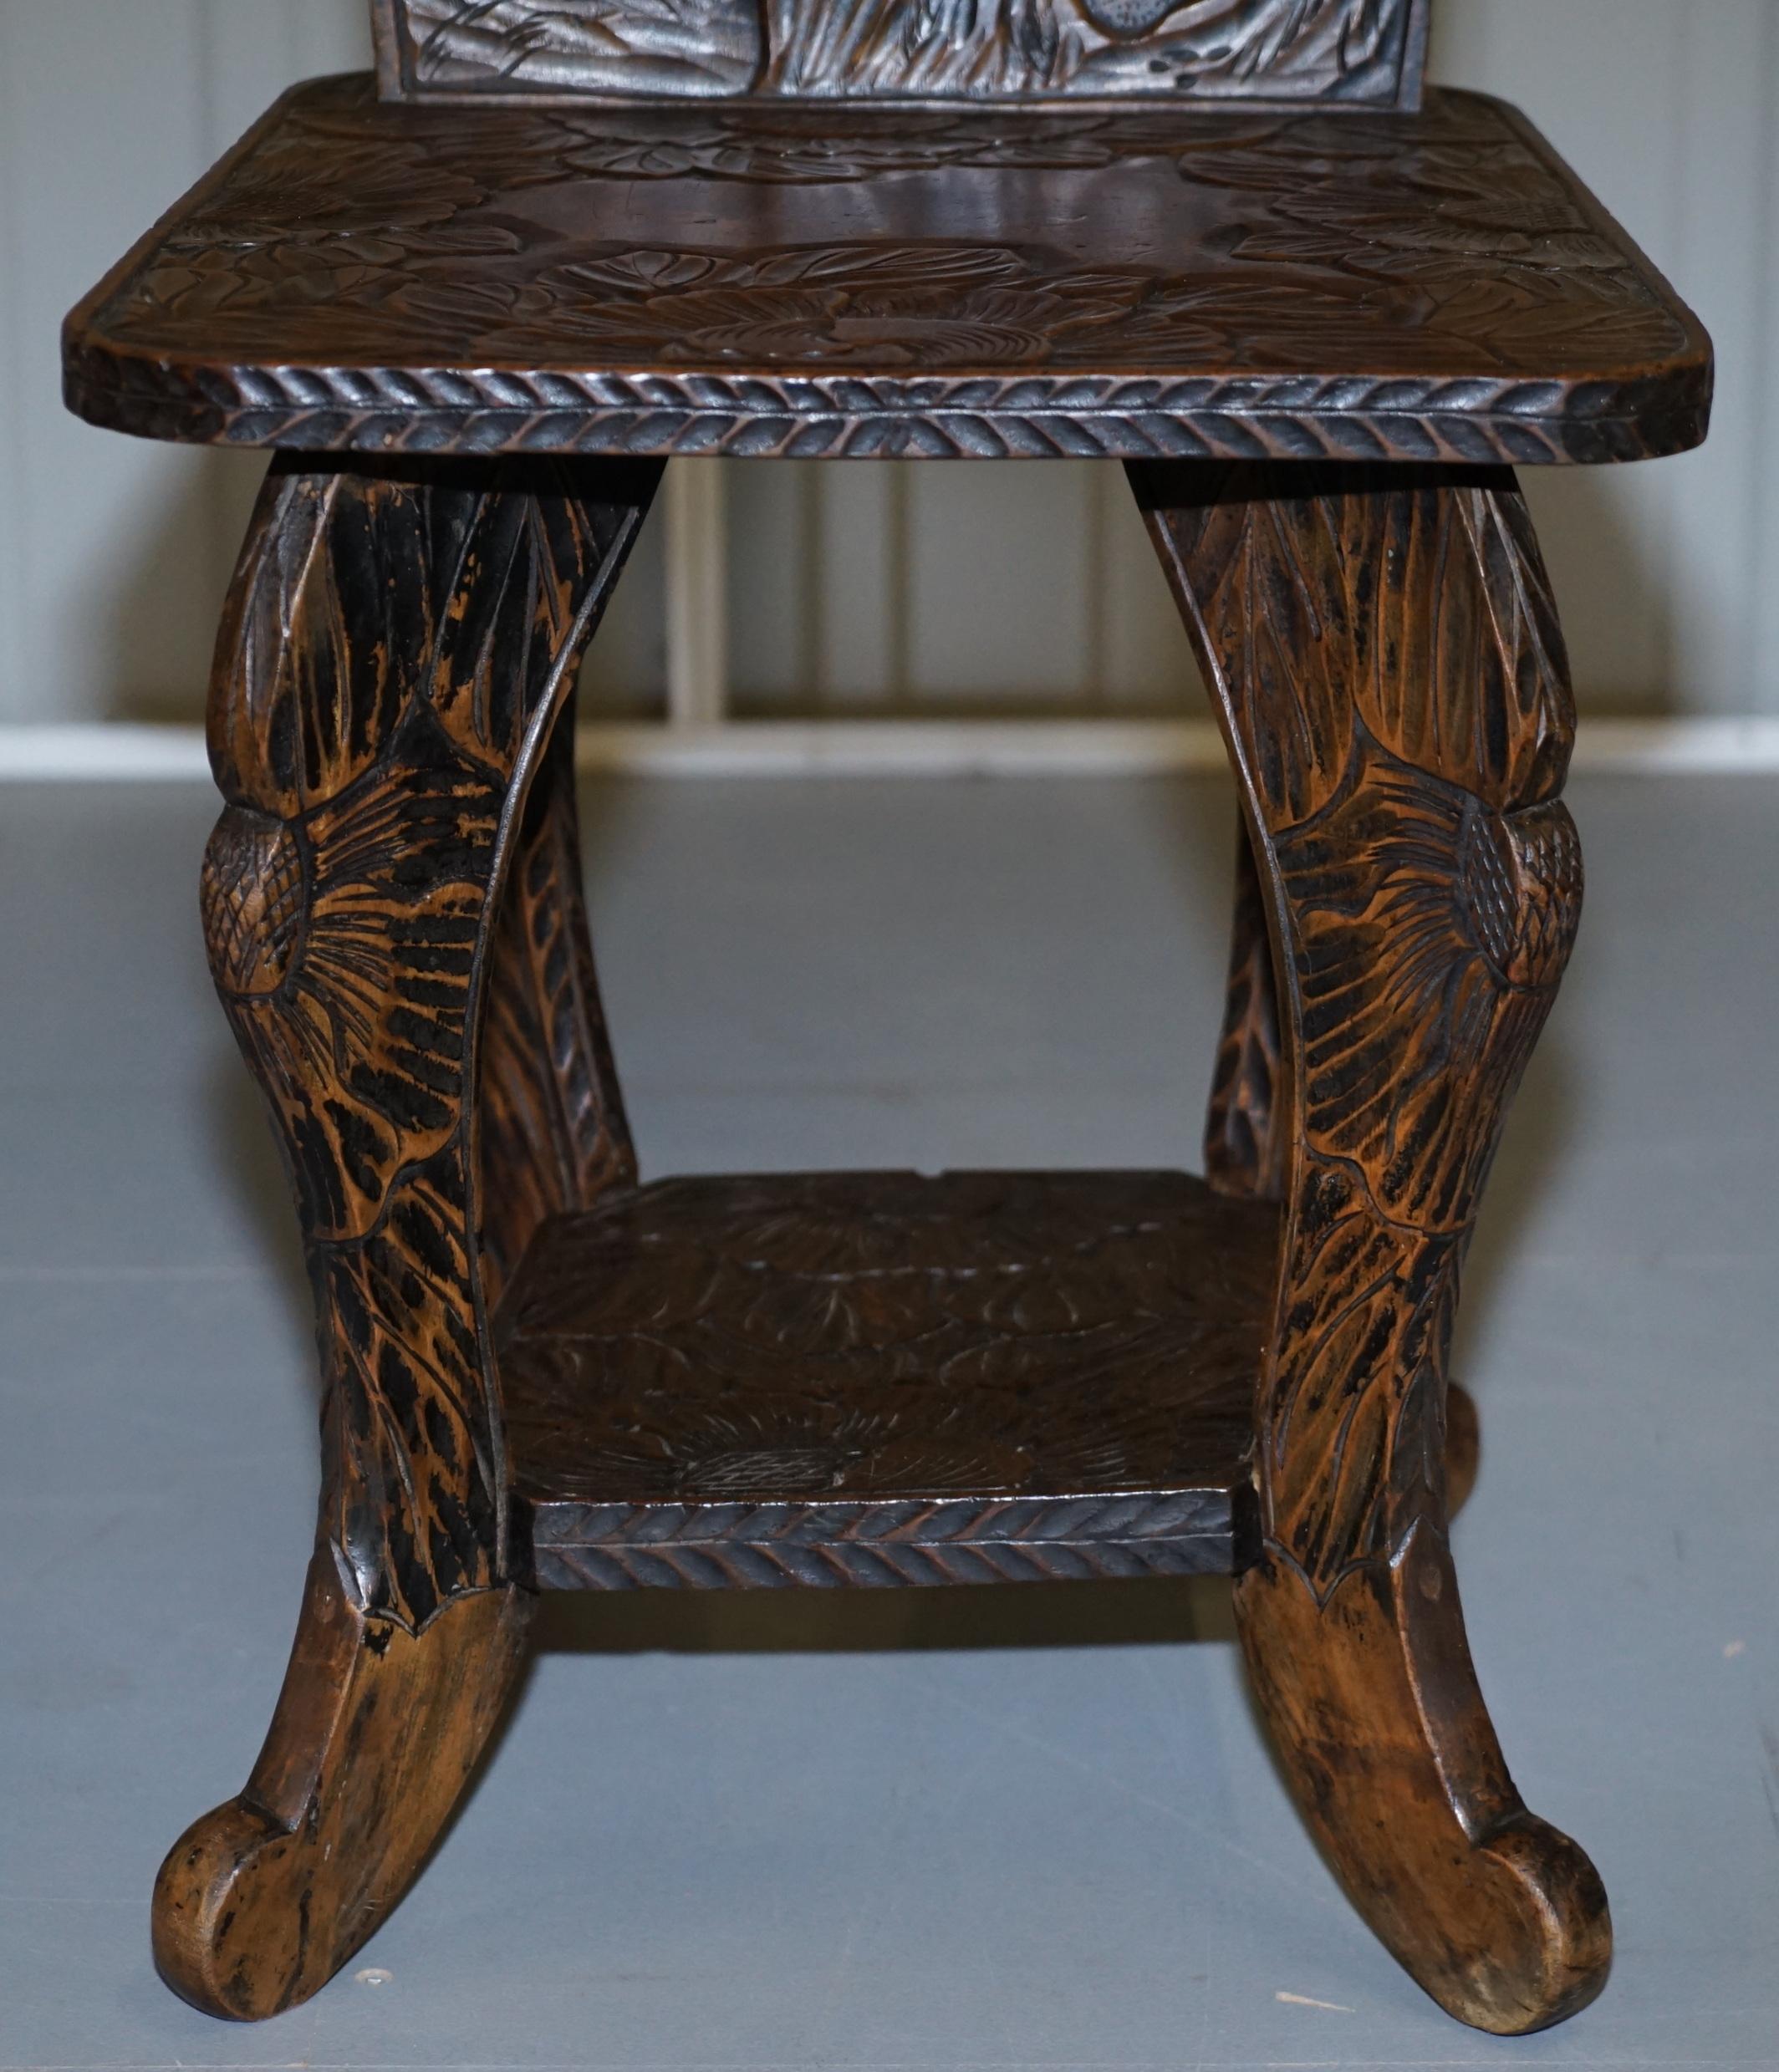 Wood Very Rare Original Liberty's London Signed Qing Dynasty Chair Floral Carving For Sale